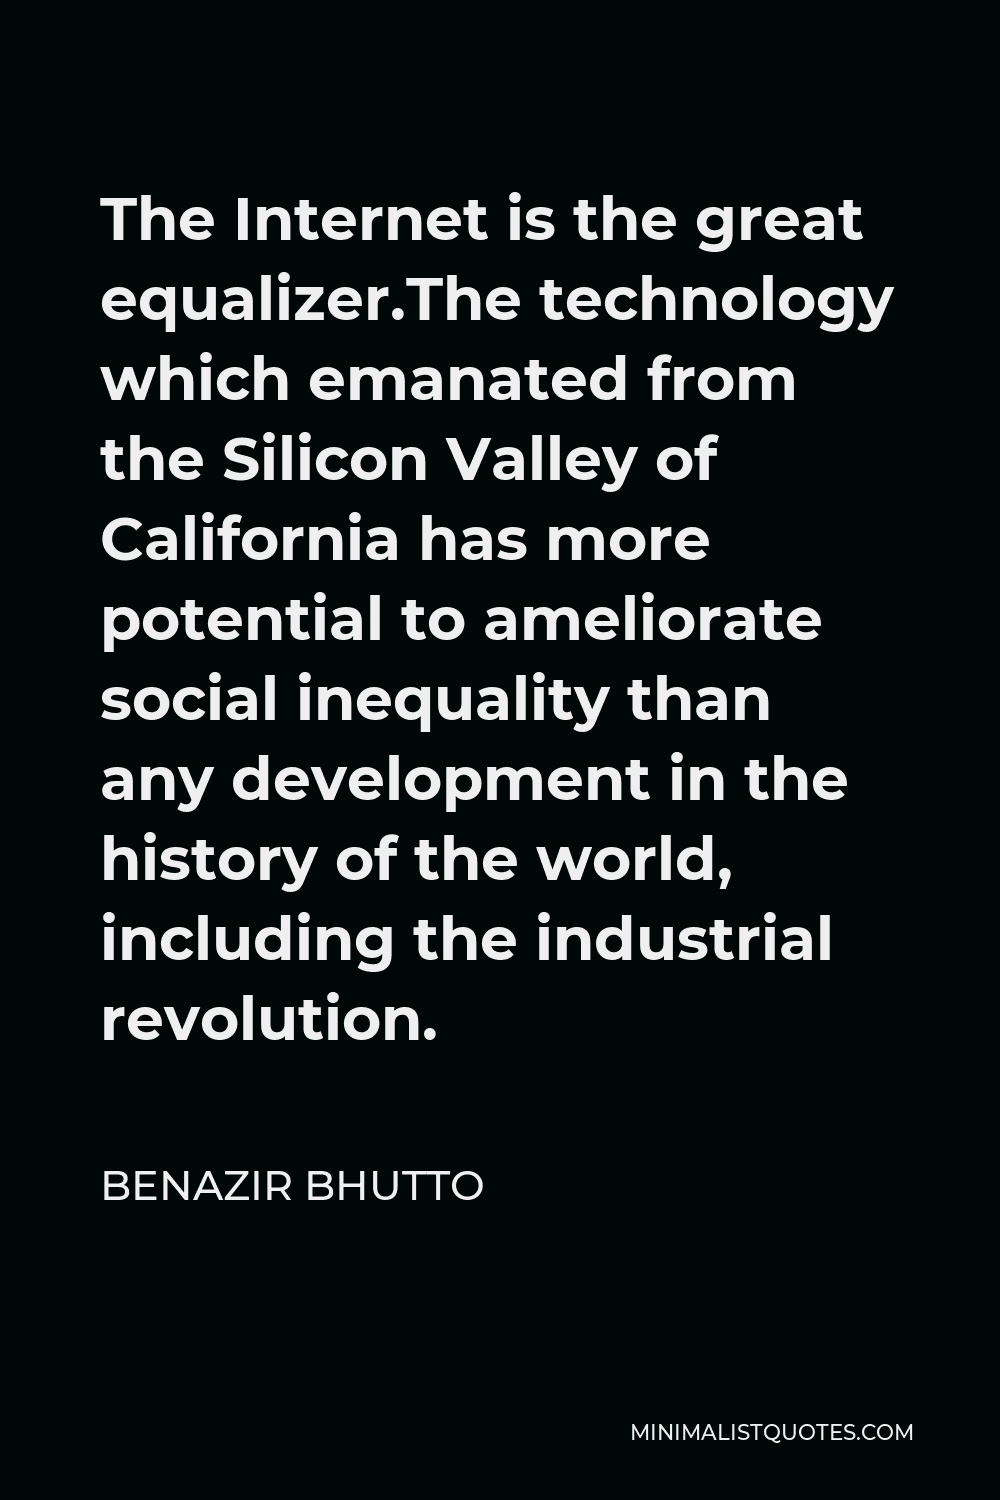 Benazir Bhutto Quote - The Internet is the great equalizer.The technology which emanated from the Silicon Valley of California has more potential to ameliorate social inequality than any development in the history of the world, including the industrial revolution.